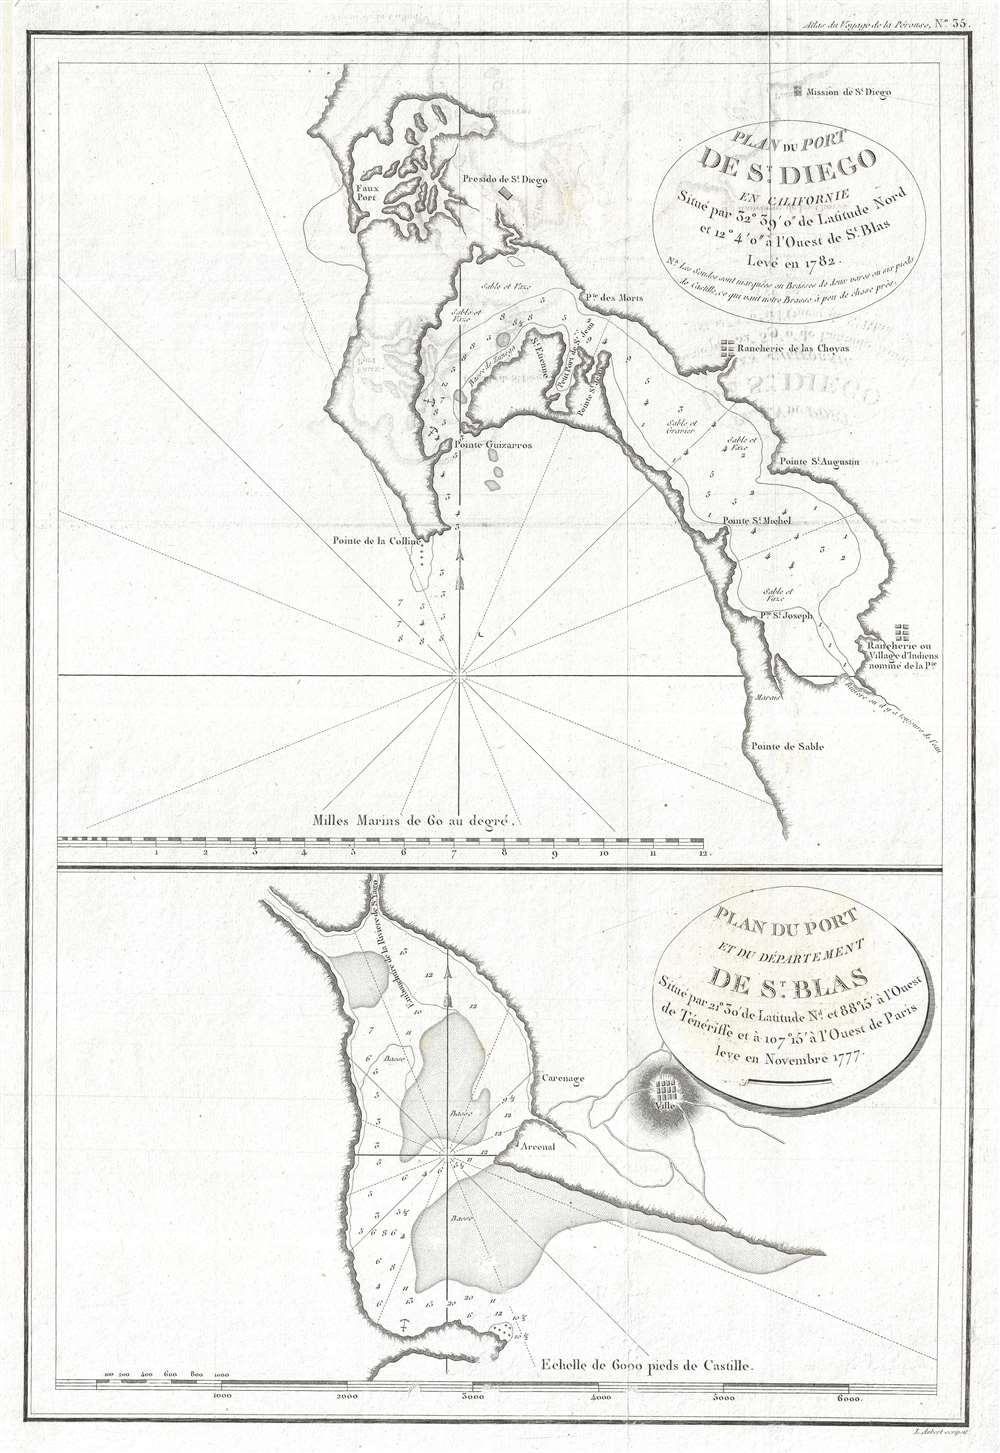 1797 La Perouse Map of San Diego Bay (earliest obtainable map of San Diego)